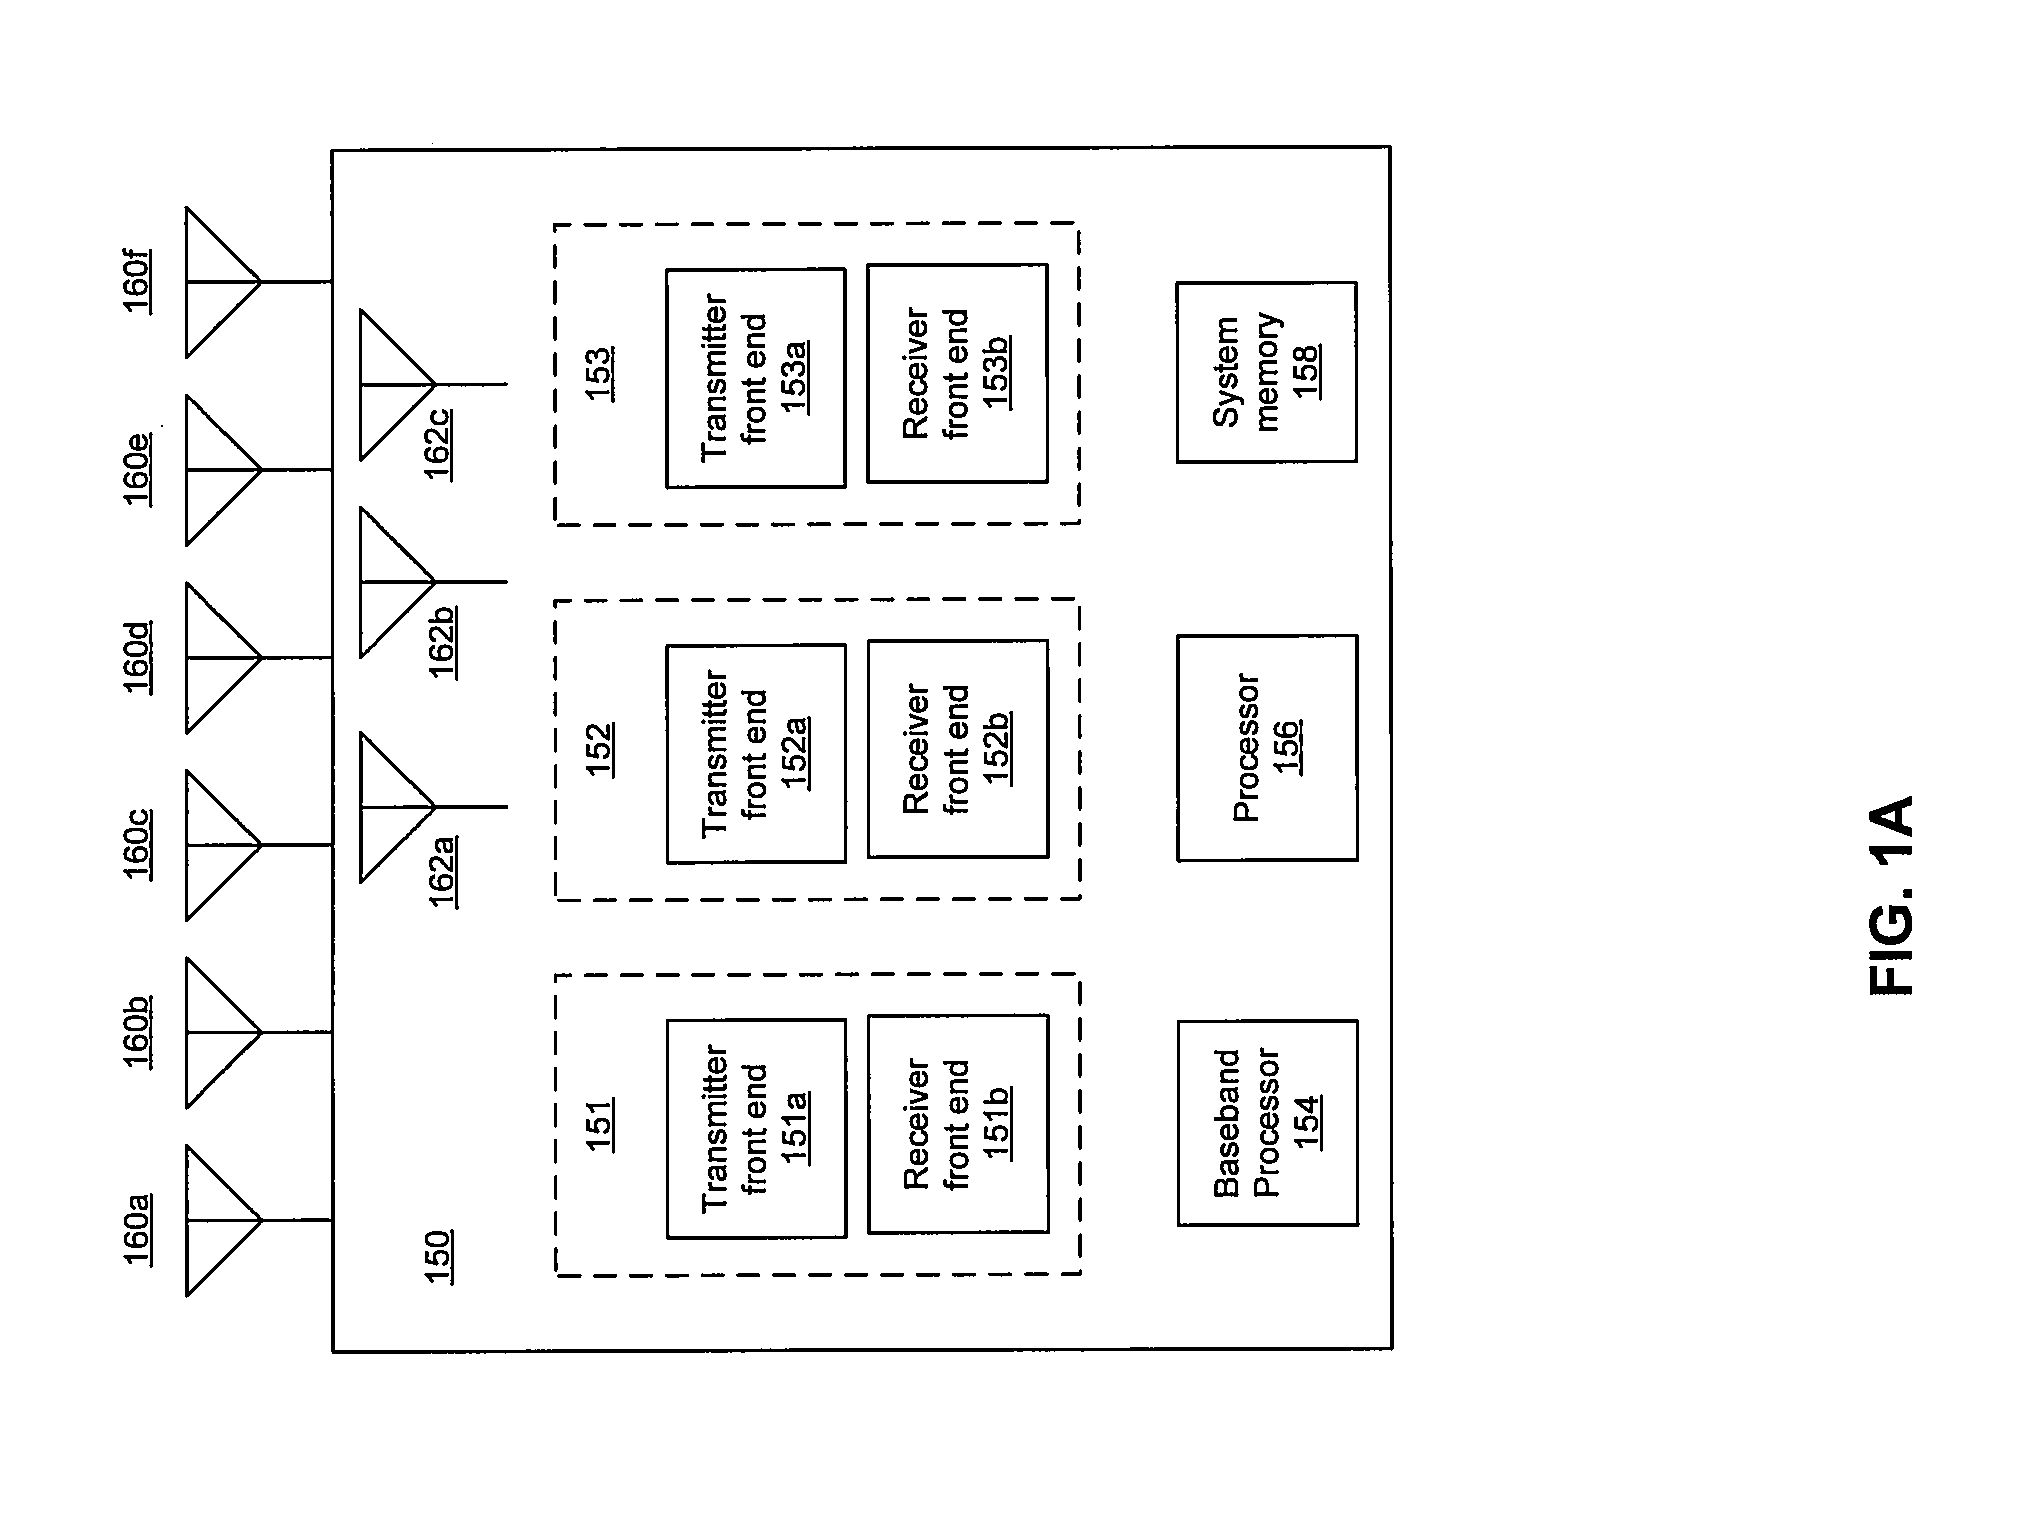 Method and system for auto detecting and auto switching antennas in a multi-antenna FM transmit/receive system